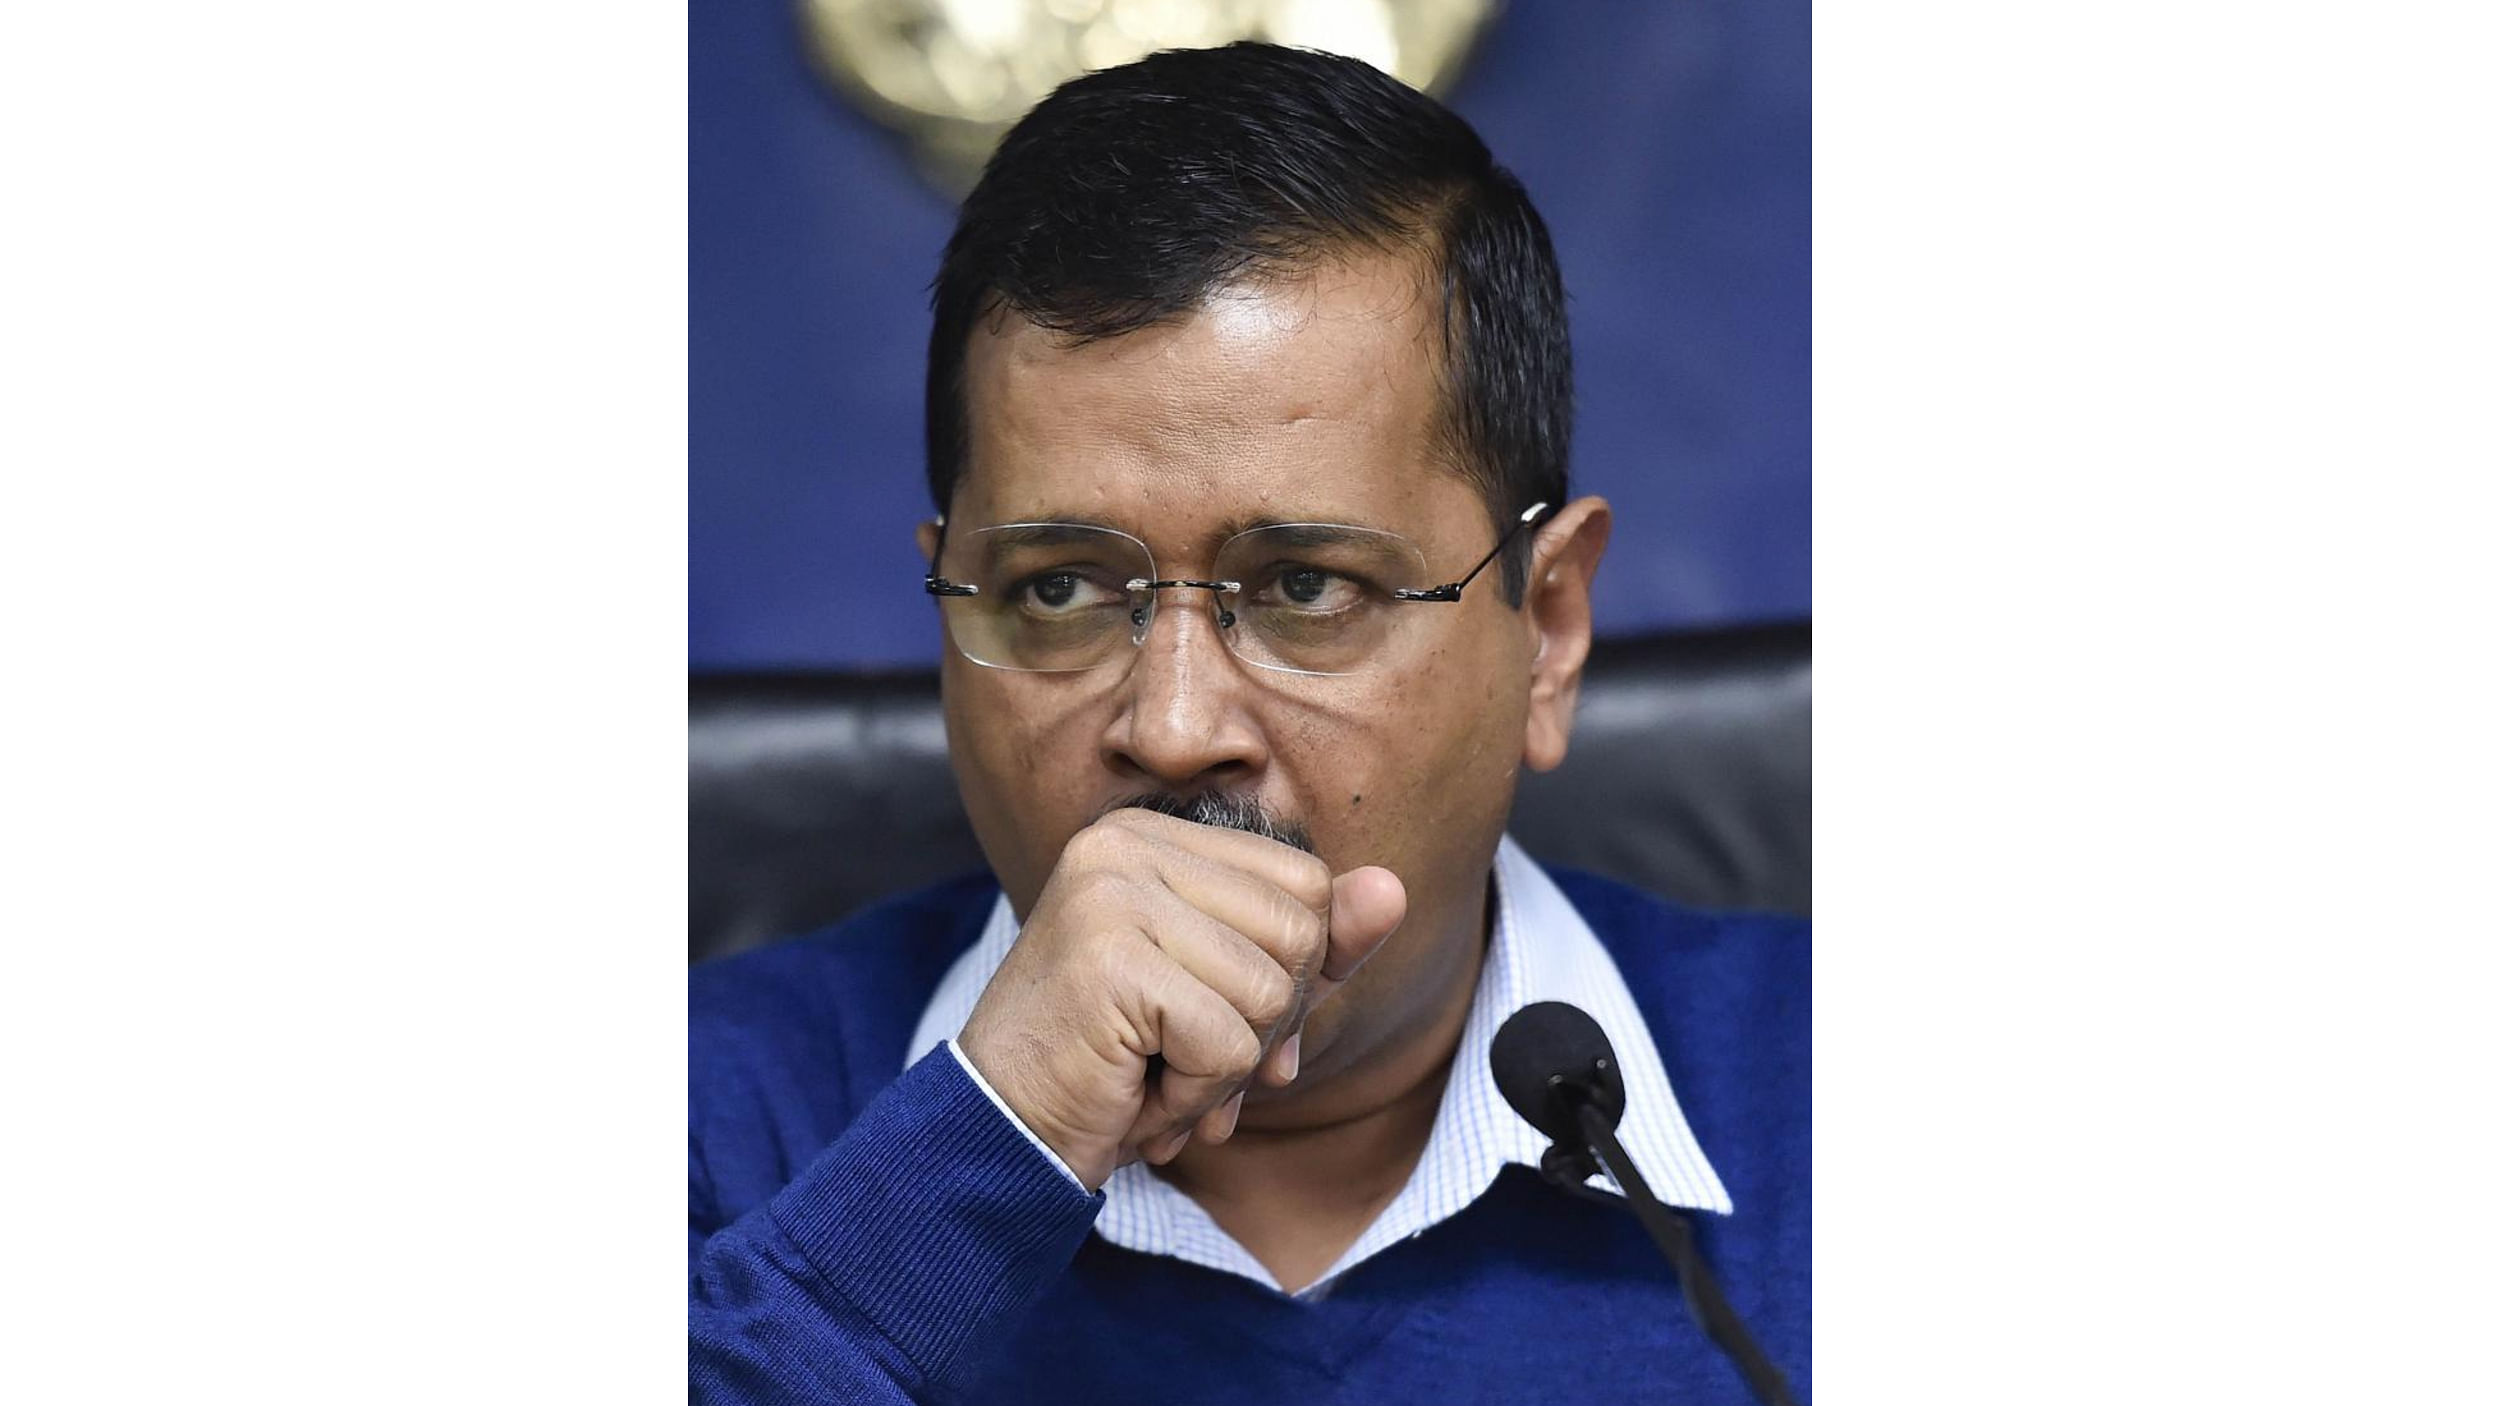 Reacting to the charges, Kejriwal said Shah said nothing other than to "abuse" him. (PTI File Photo)